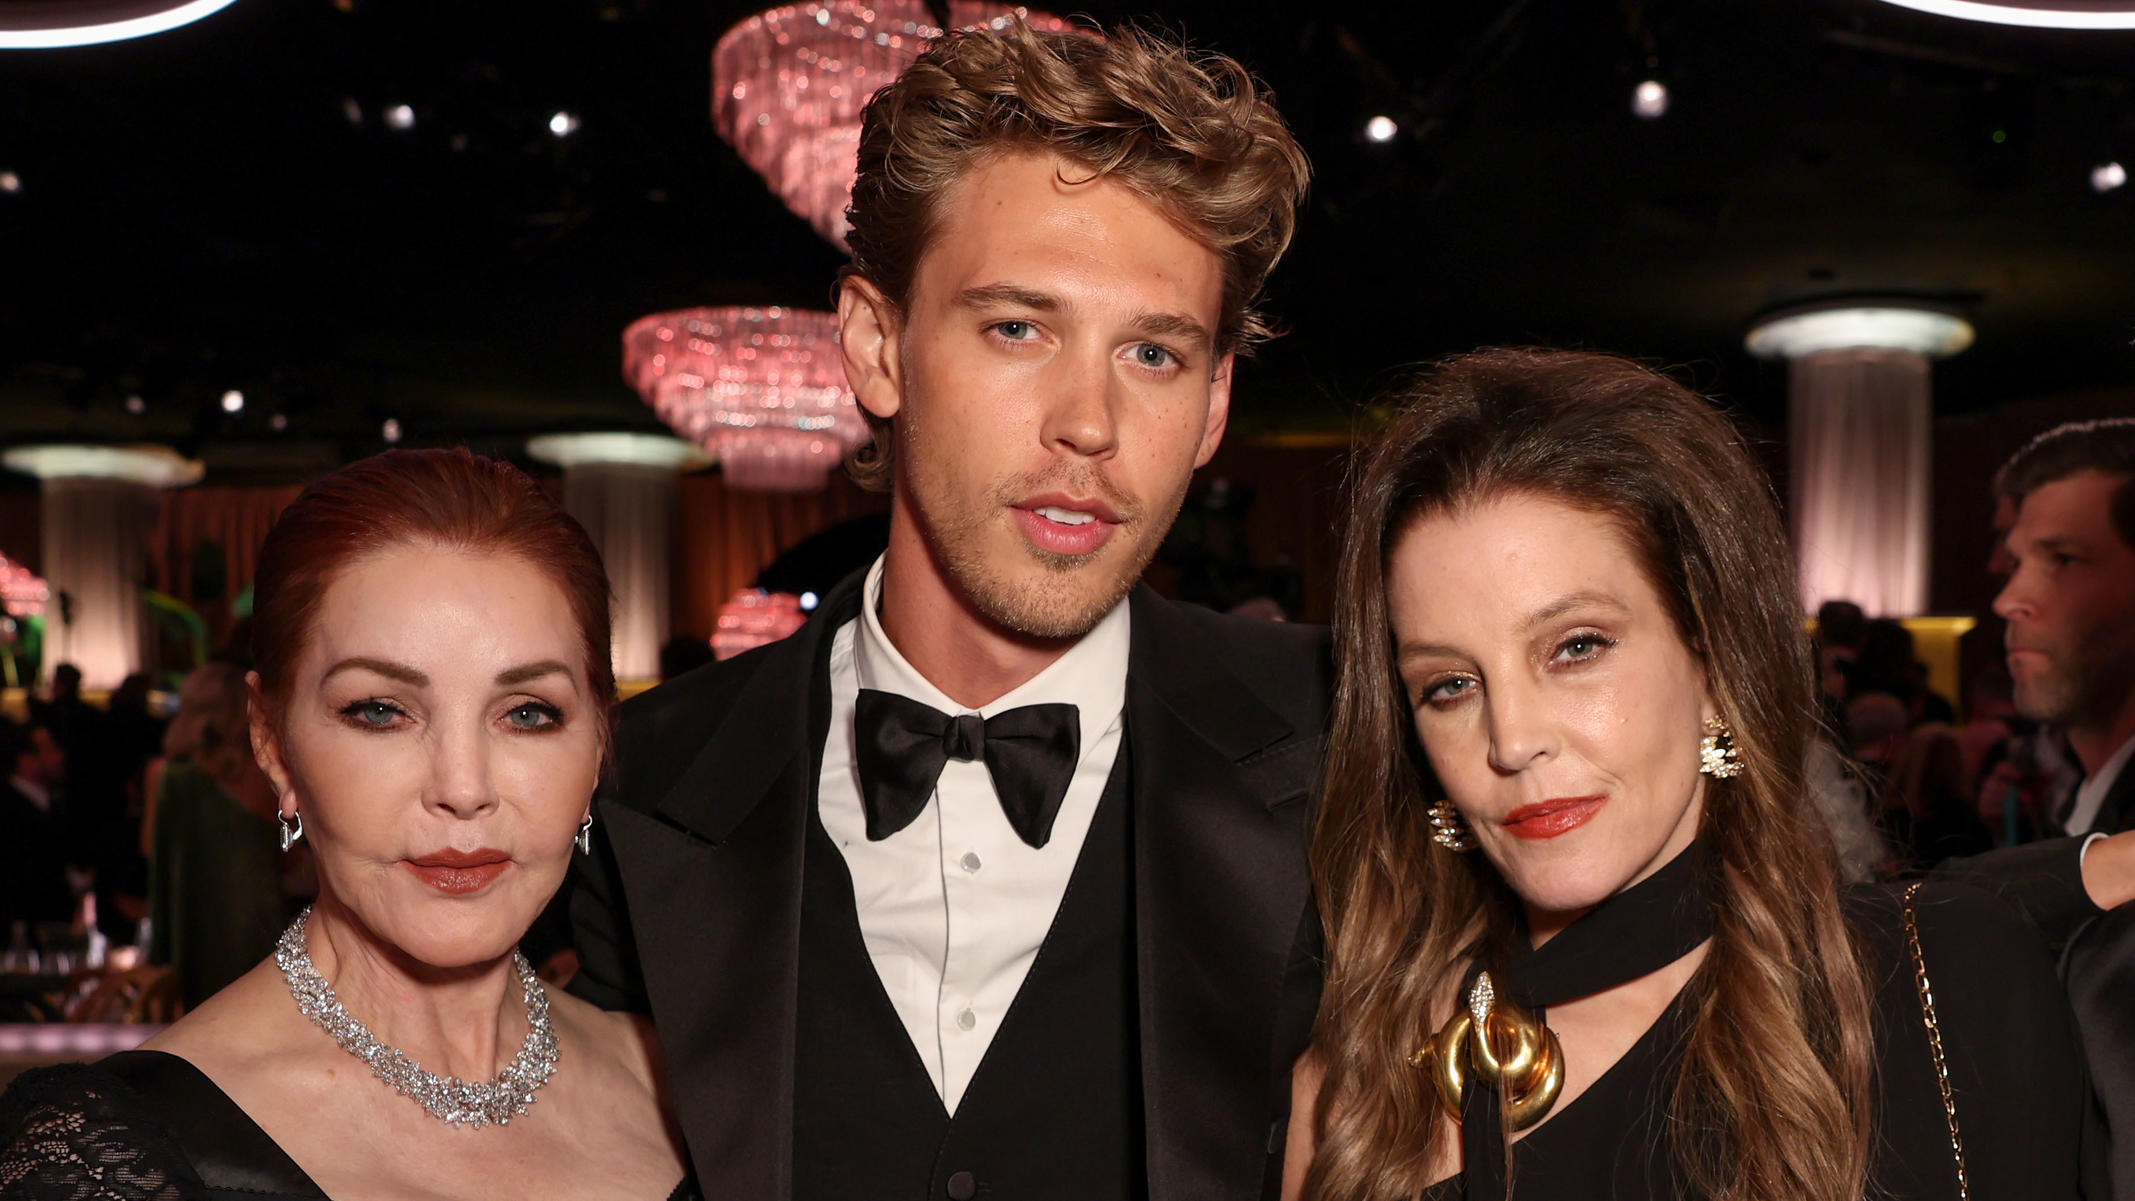 Priscilla Presley, Austin Butler, Lisa Marie Presley and Baz Luhrmann during the 80th Annual Golden Globe Awards® show at the Beverly Hilton in Beverly Hills, CA on Tuesday, January 10, 2023*Editorial Use Only* CAP/PLF©HFPA/supplied by Capital Pictur